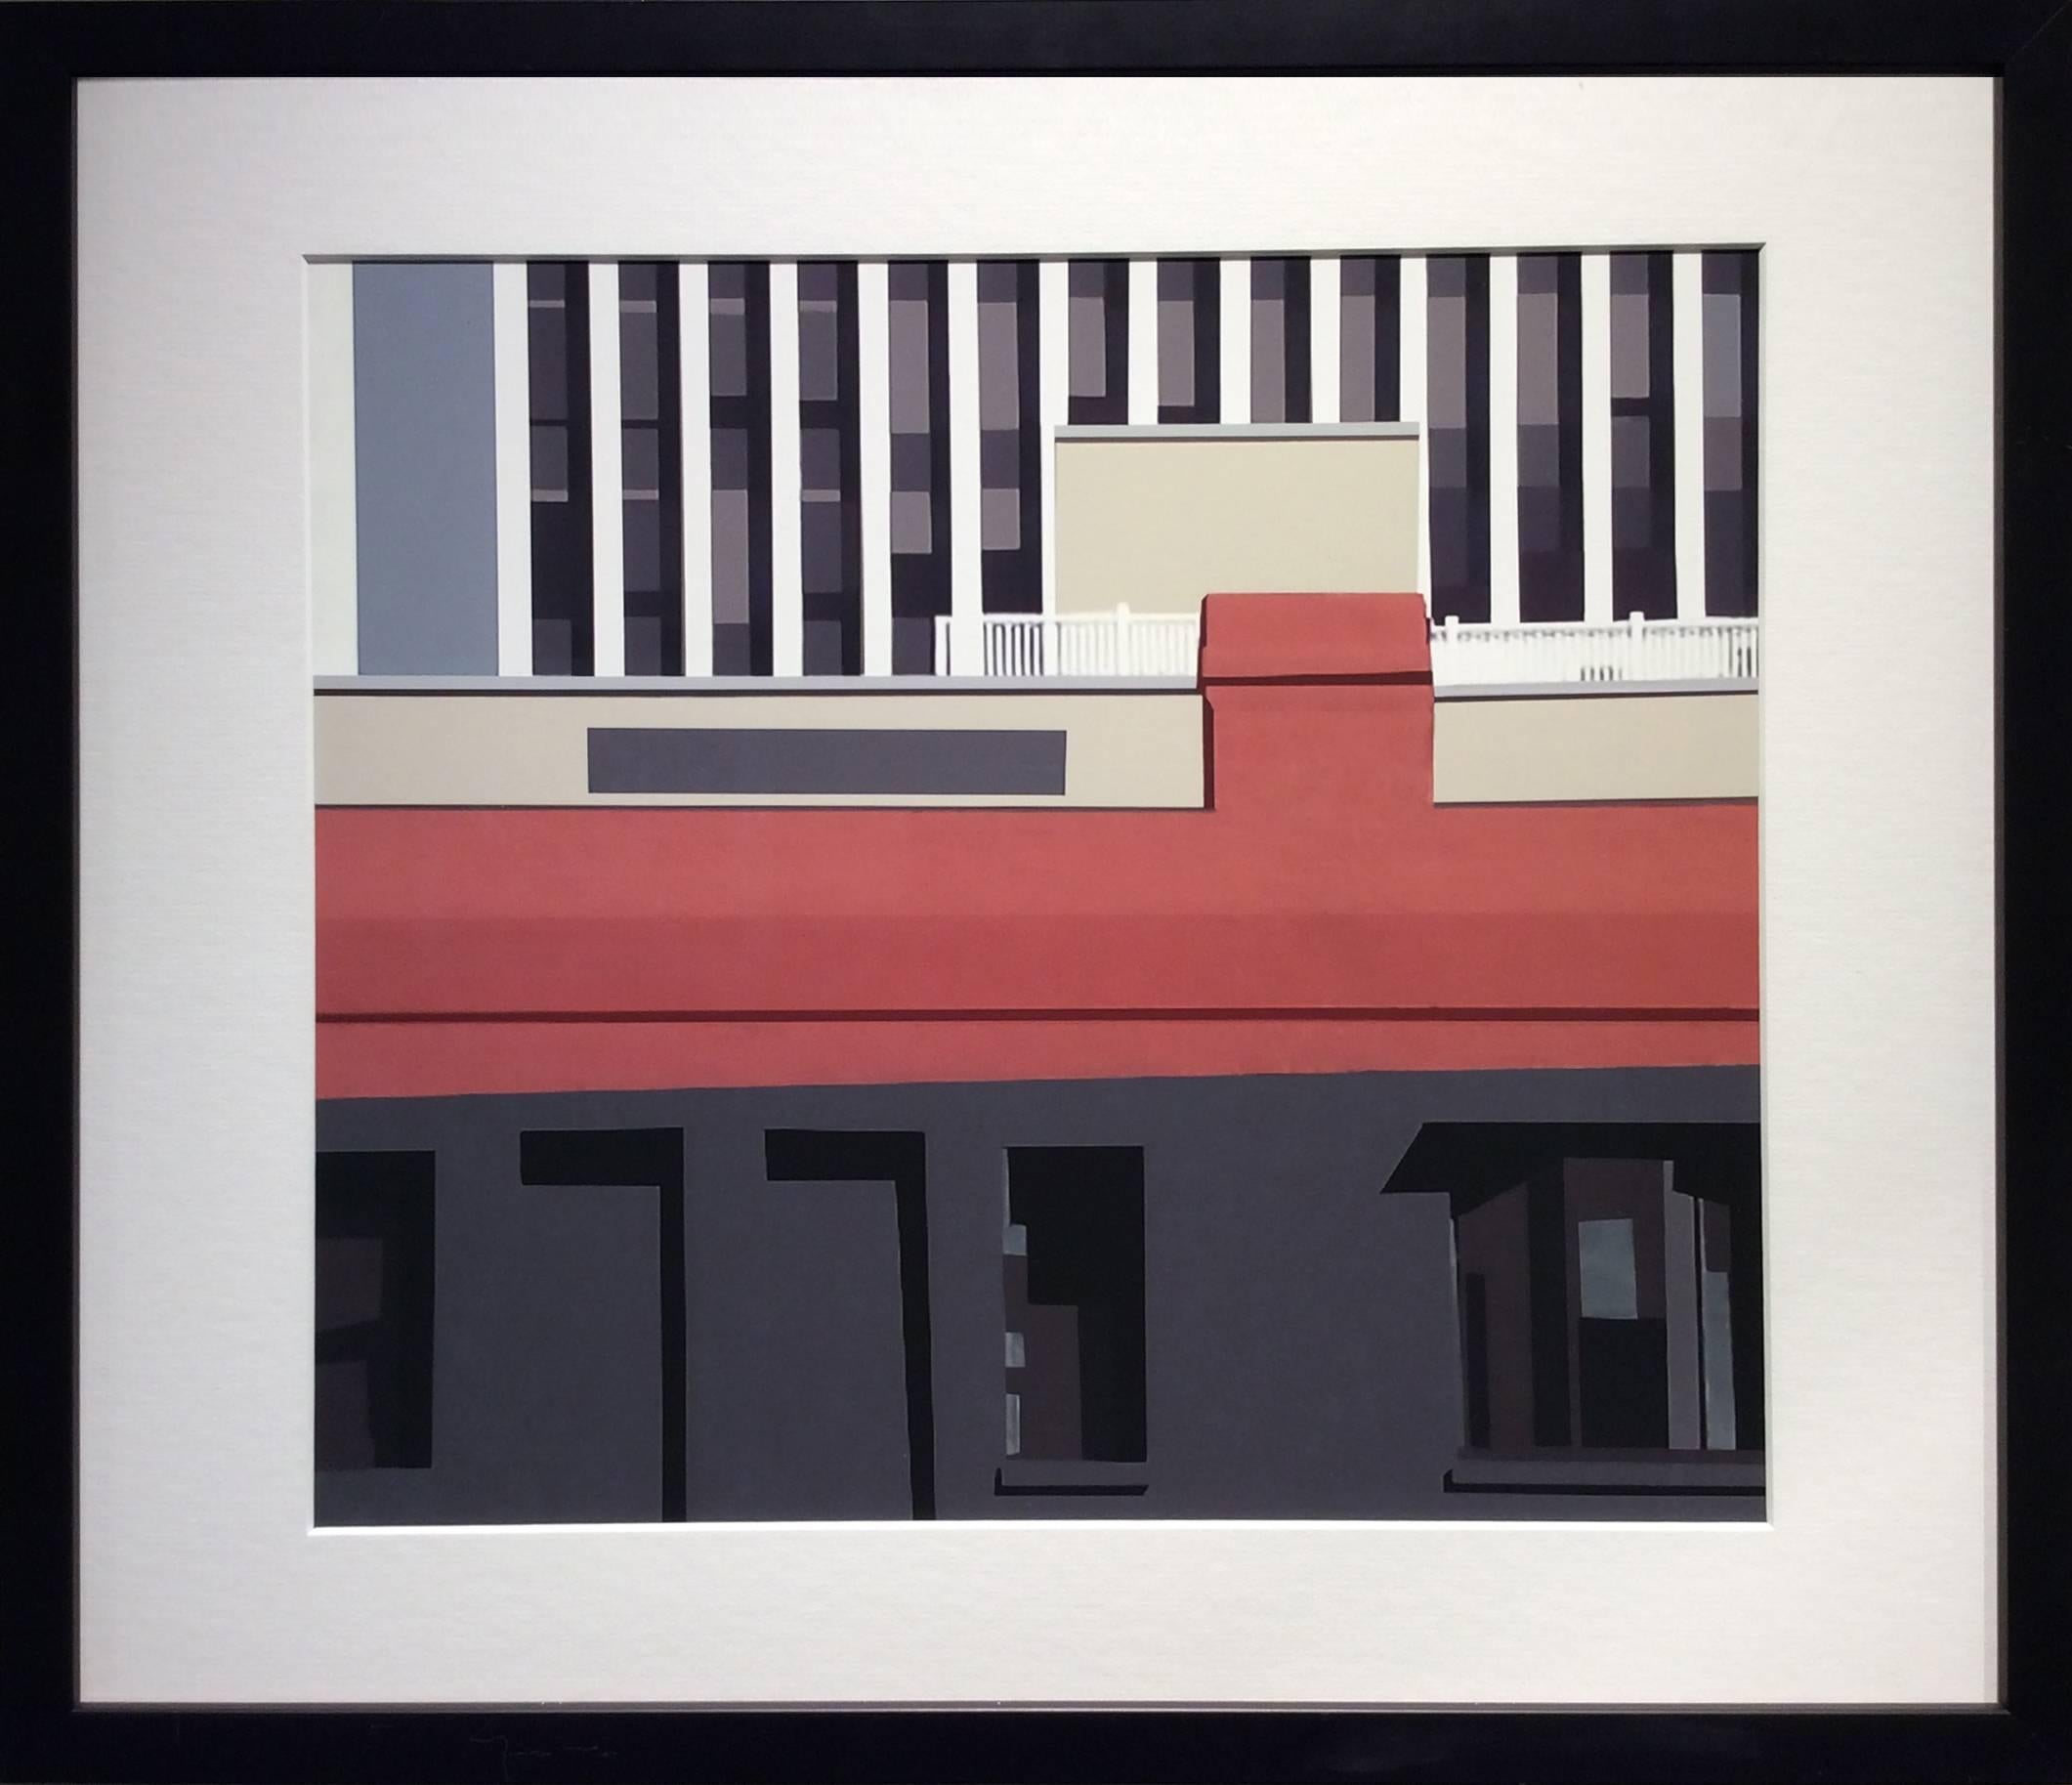 Building (Modern Abstracted Inkjet Print of Minimalist Architecture) - Photograph by Stephanie Blumenthal